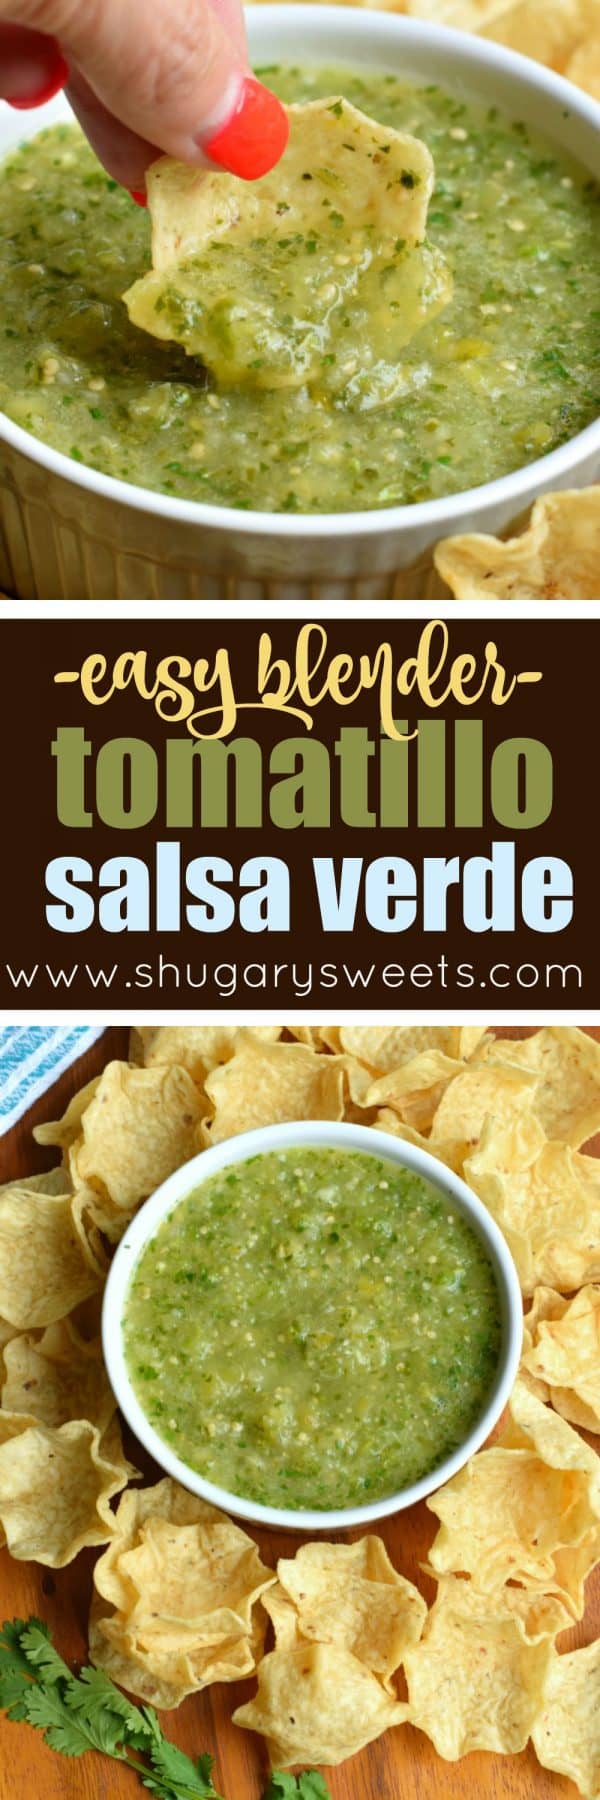 Try this Tomatillo Salsa recipe for an authentic, tangy Mexican salsa verde. Perfect for pairing with tacos, enchiladas or a big bowl of chips! #tomatillosalsa #salsaverde #gameday #tortillachips #snacks #salsa